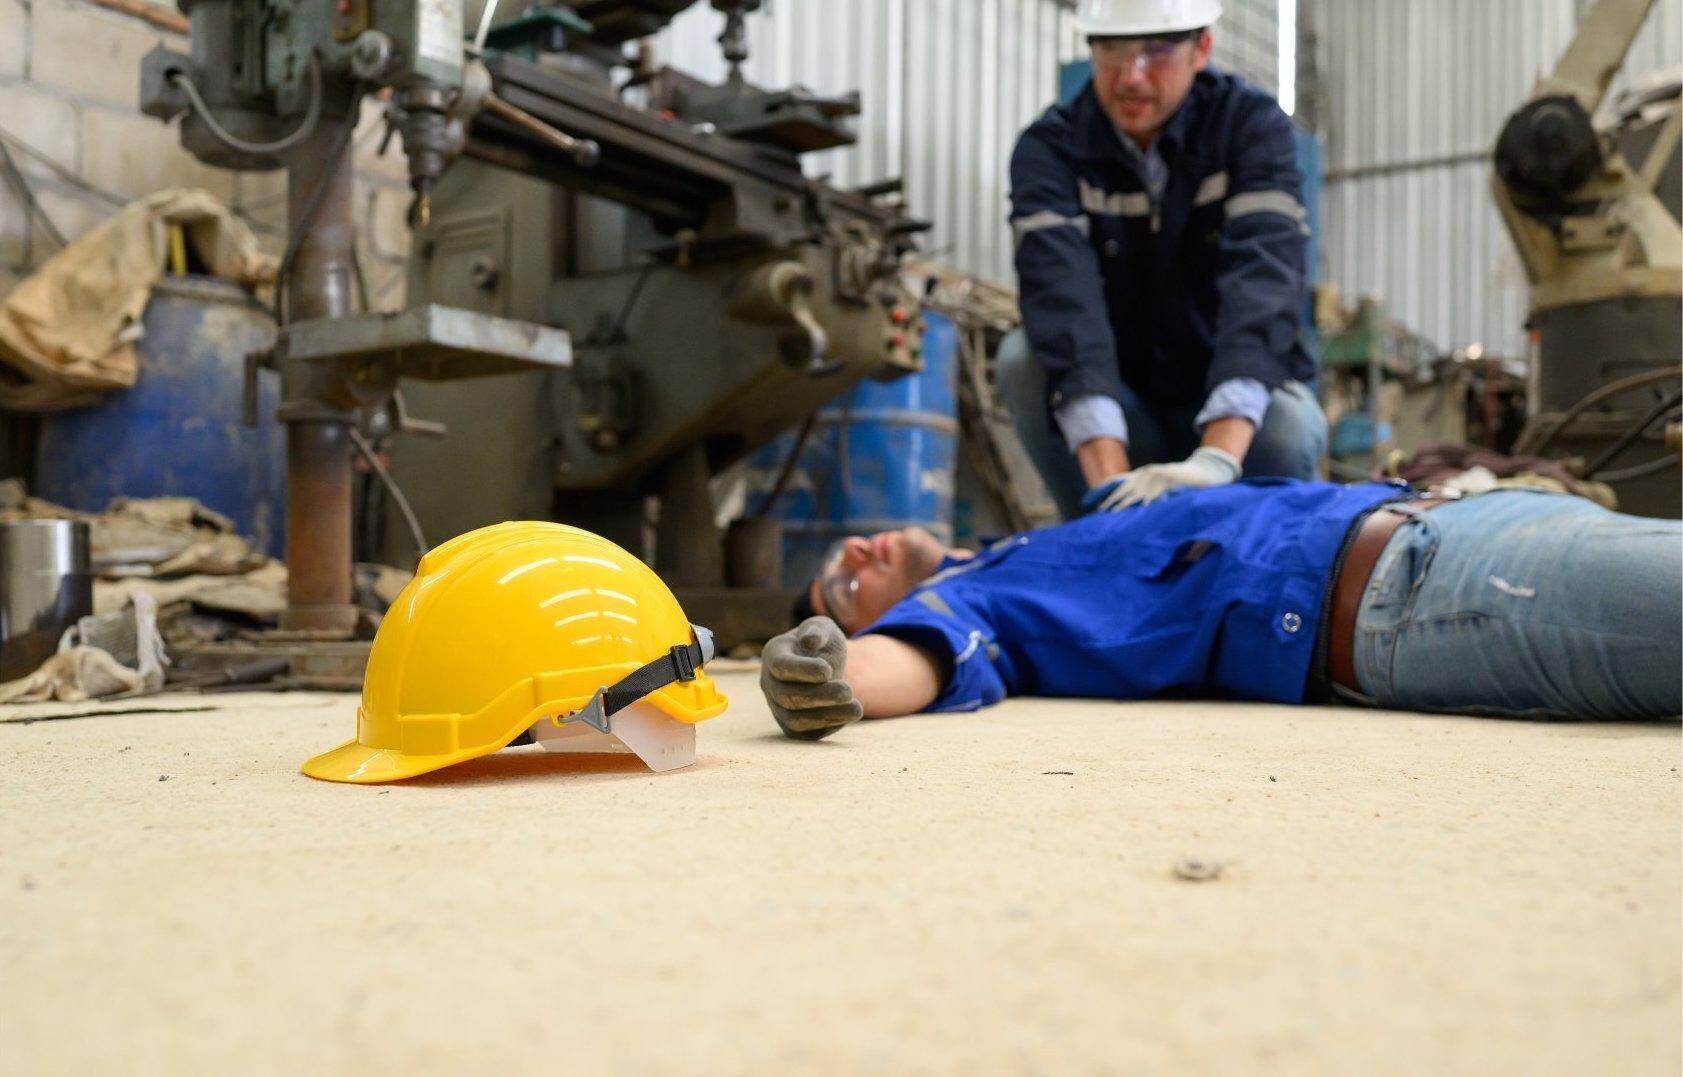 An unconscious man who has been injured on the job who will file for workers compensation in Peachtree City, Georgia